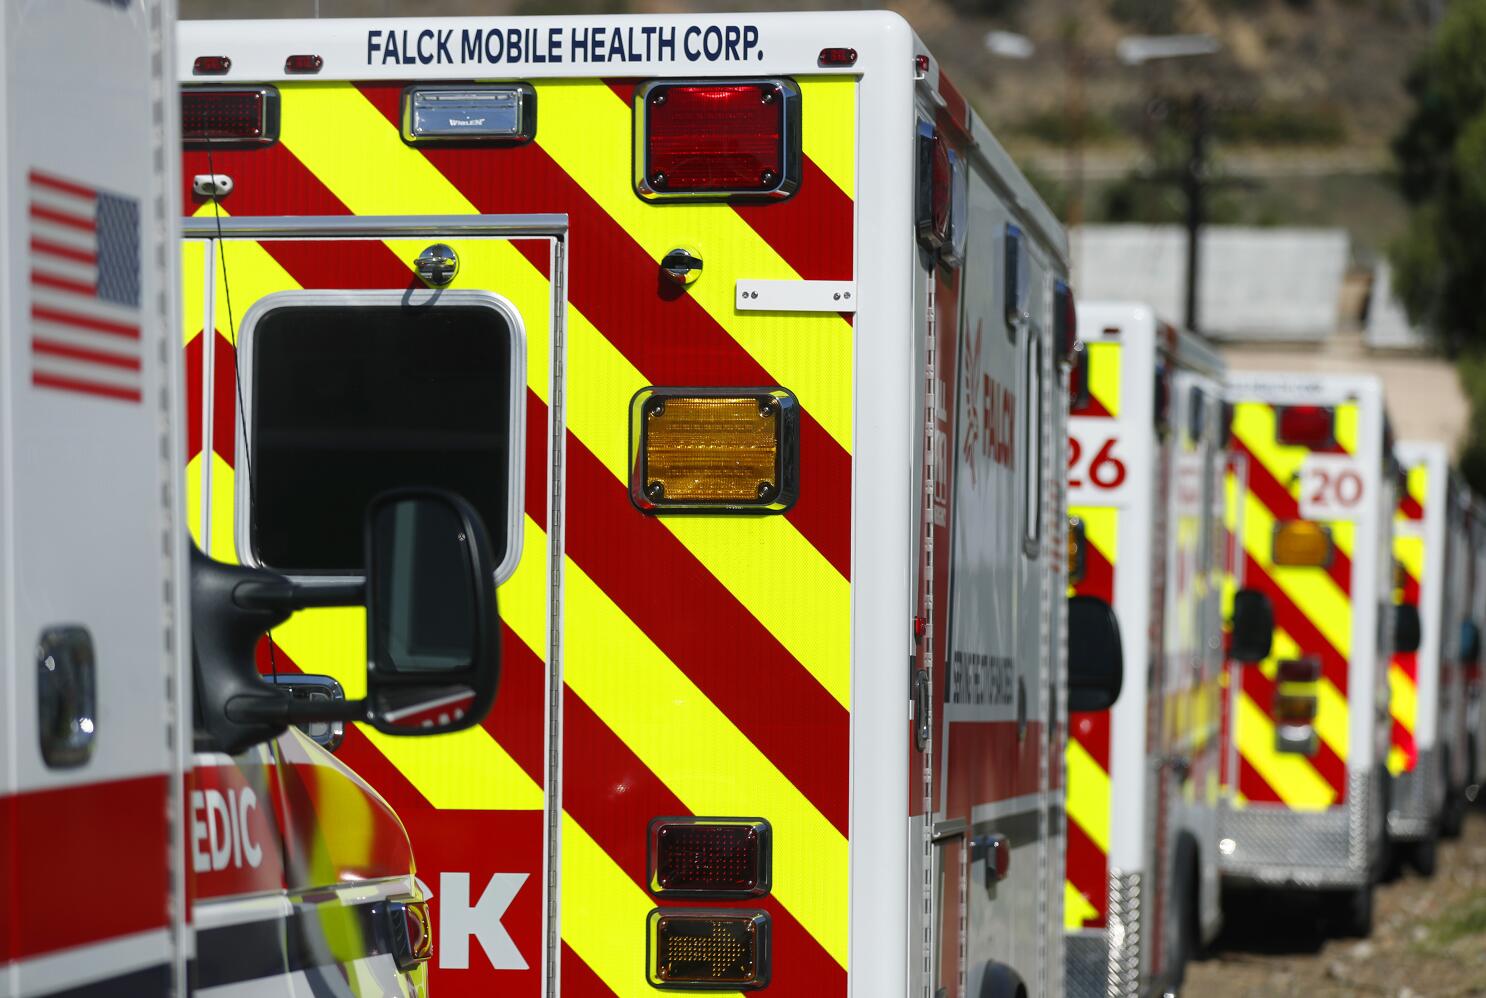 New California Law Offers Fresh Protection From Steep Ambulance